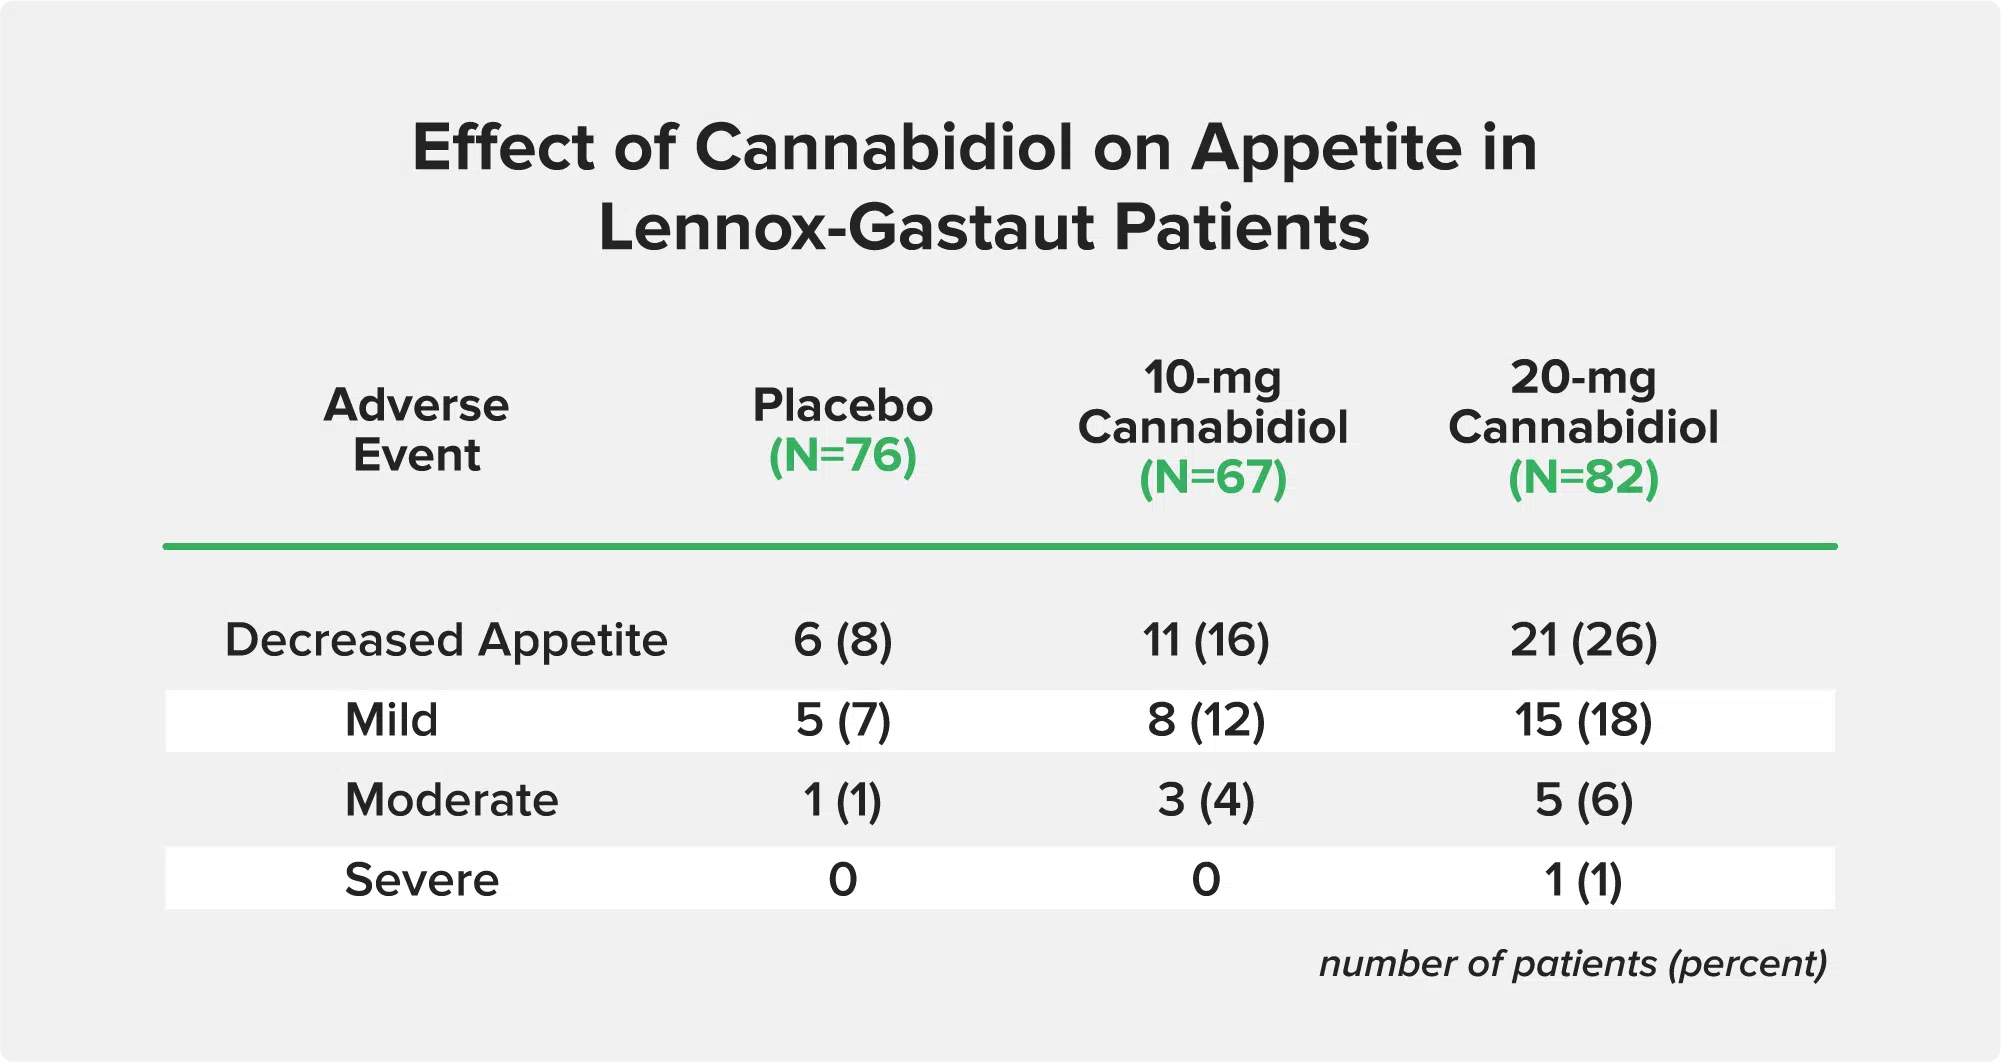 Effect of Cannabidiol on Appetite in Lennox-Gastaut Patients